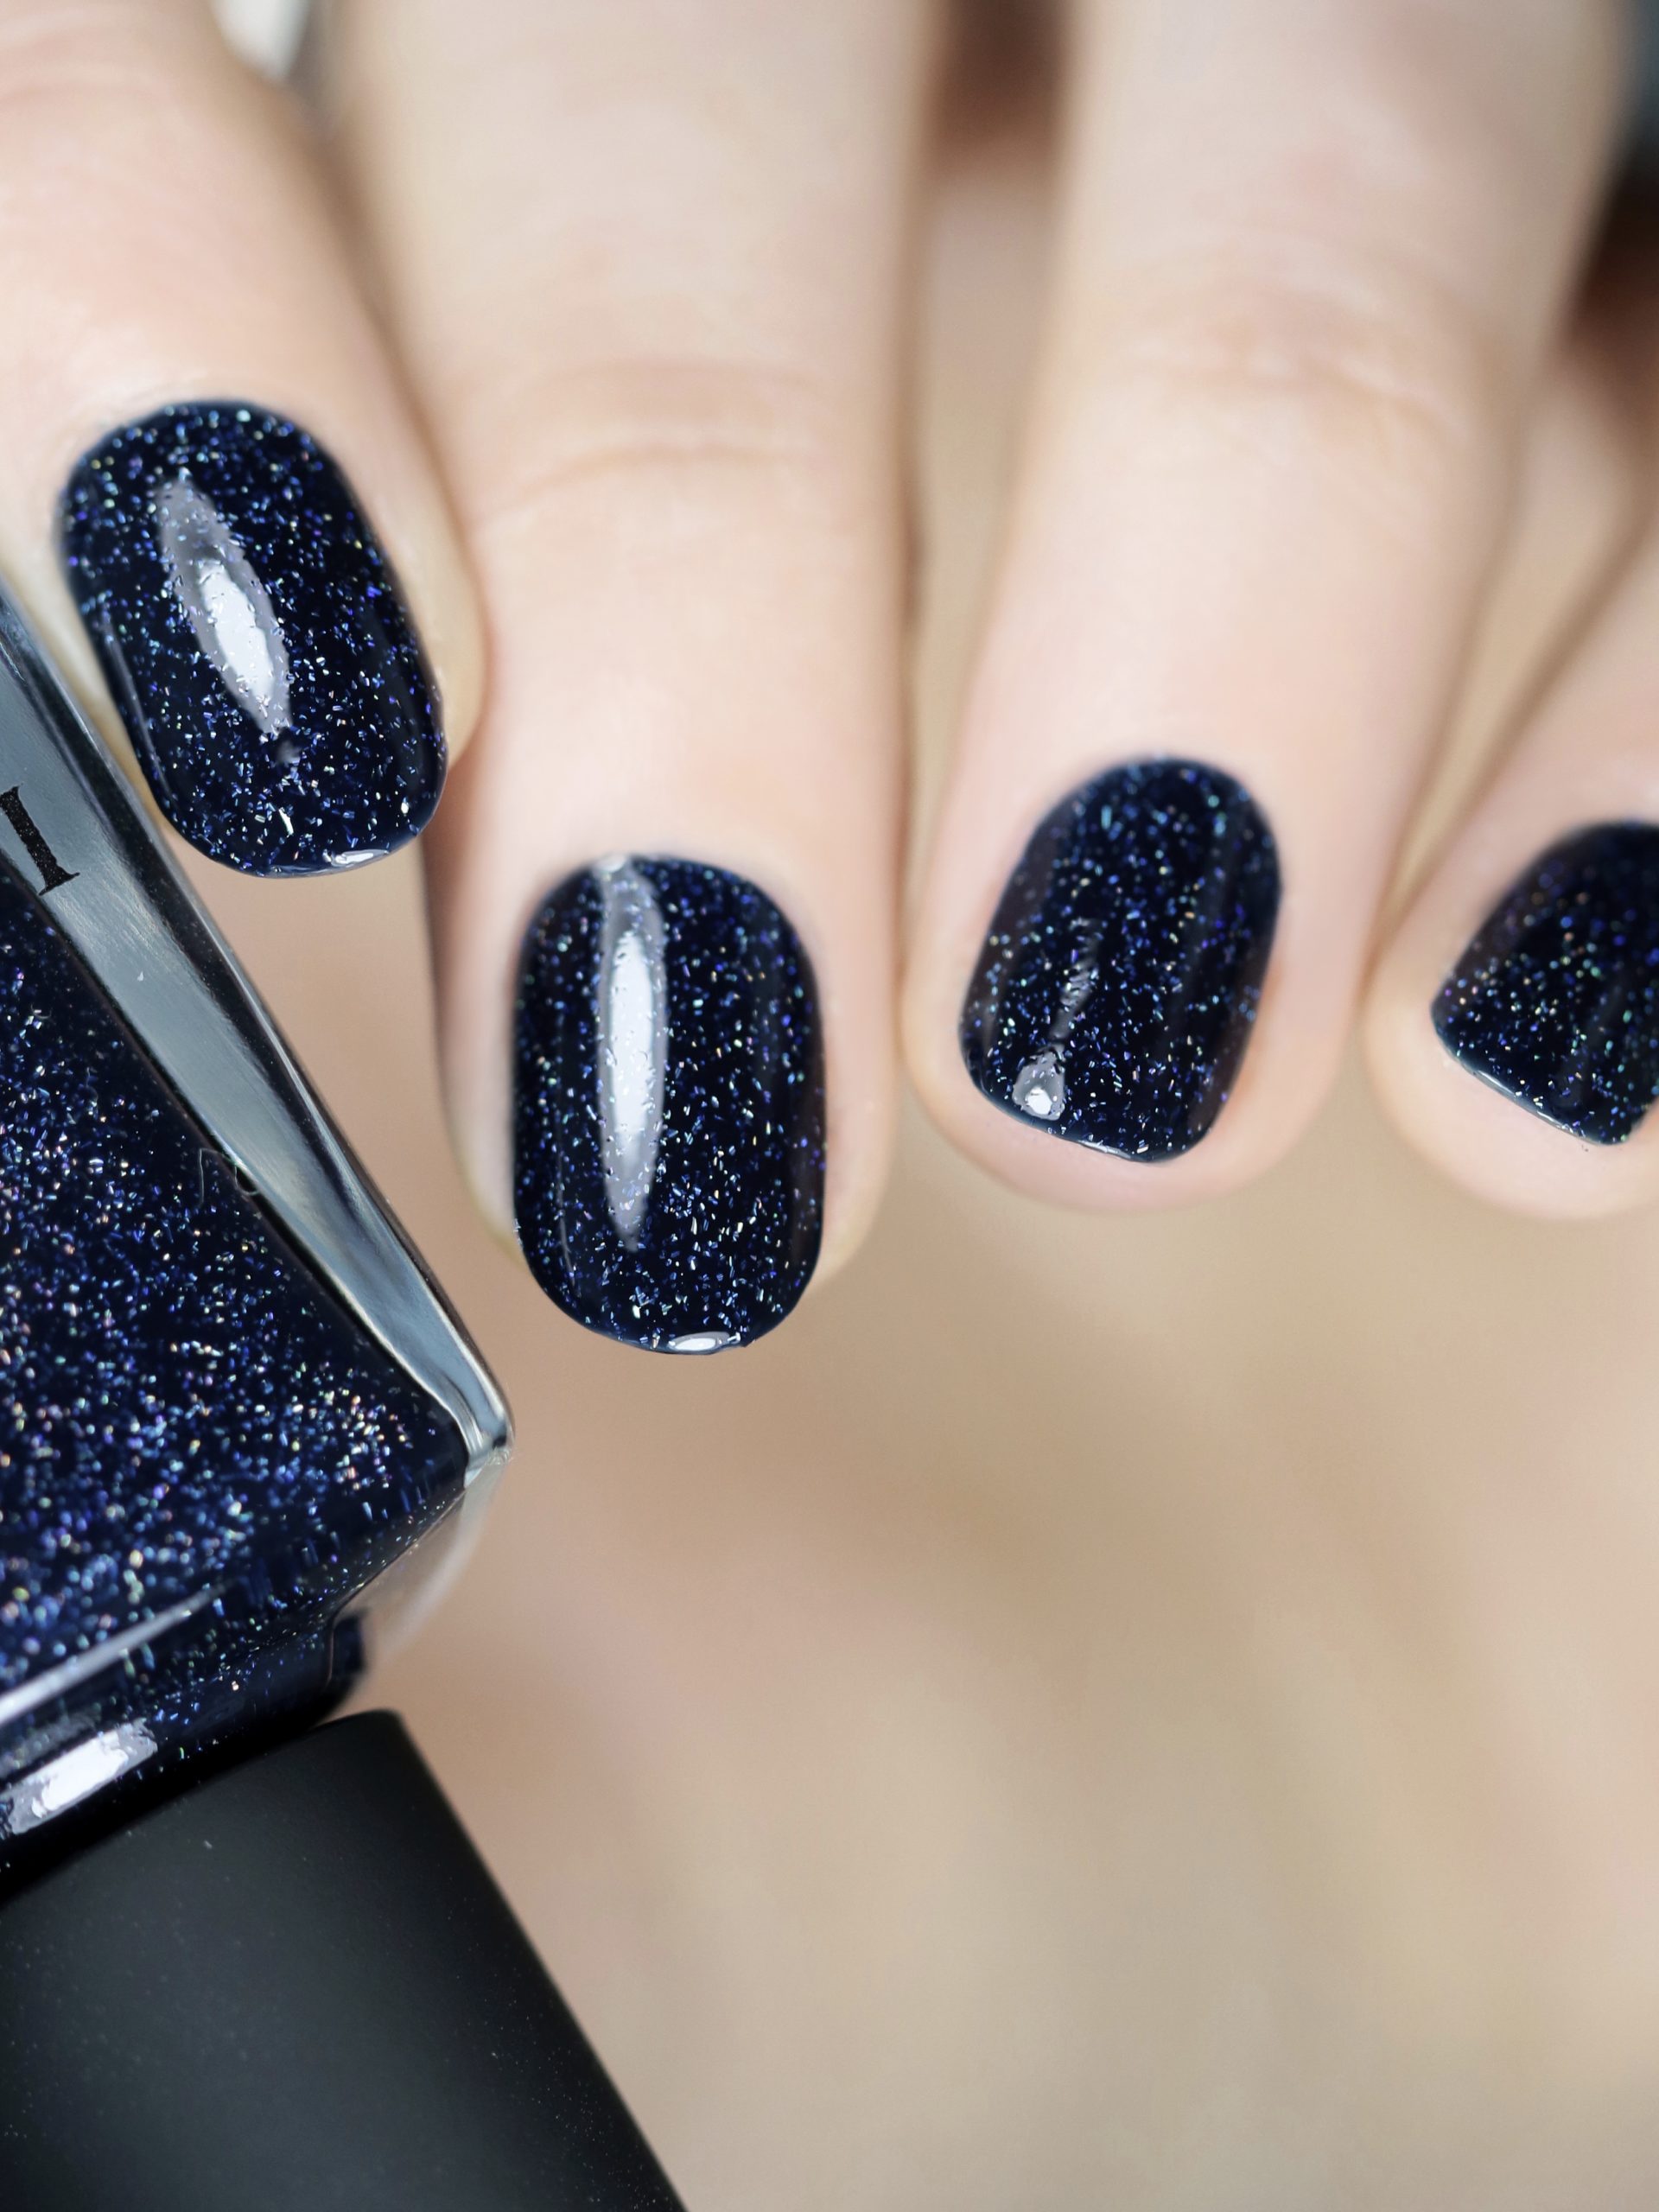 You Up? - Deep Navy Blue Holographic Nail Polish by ILNP